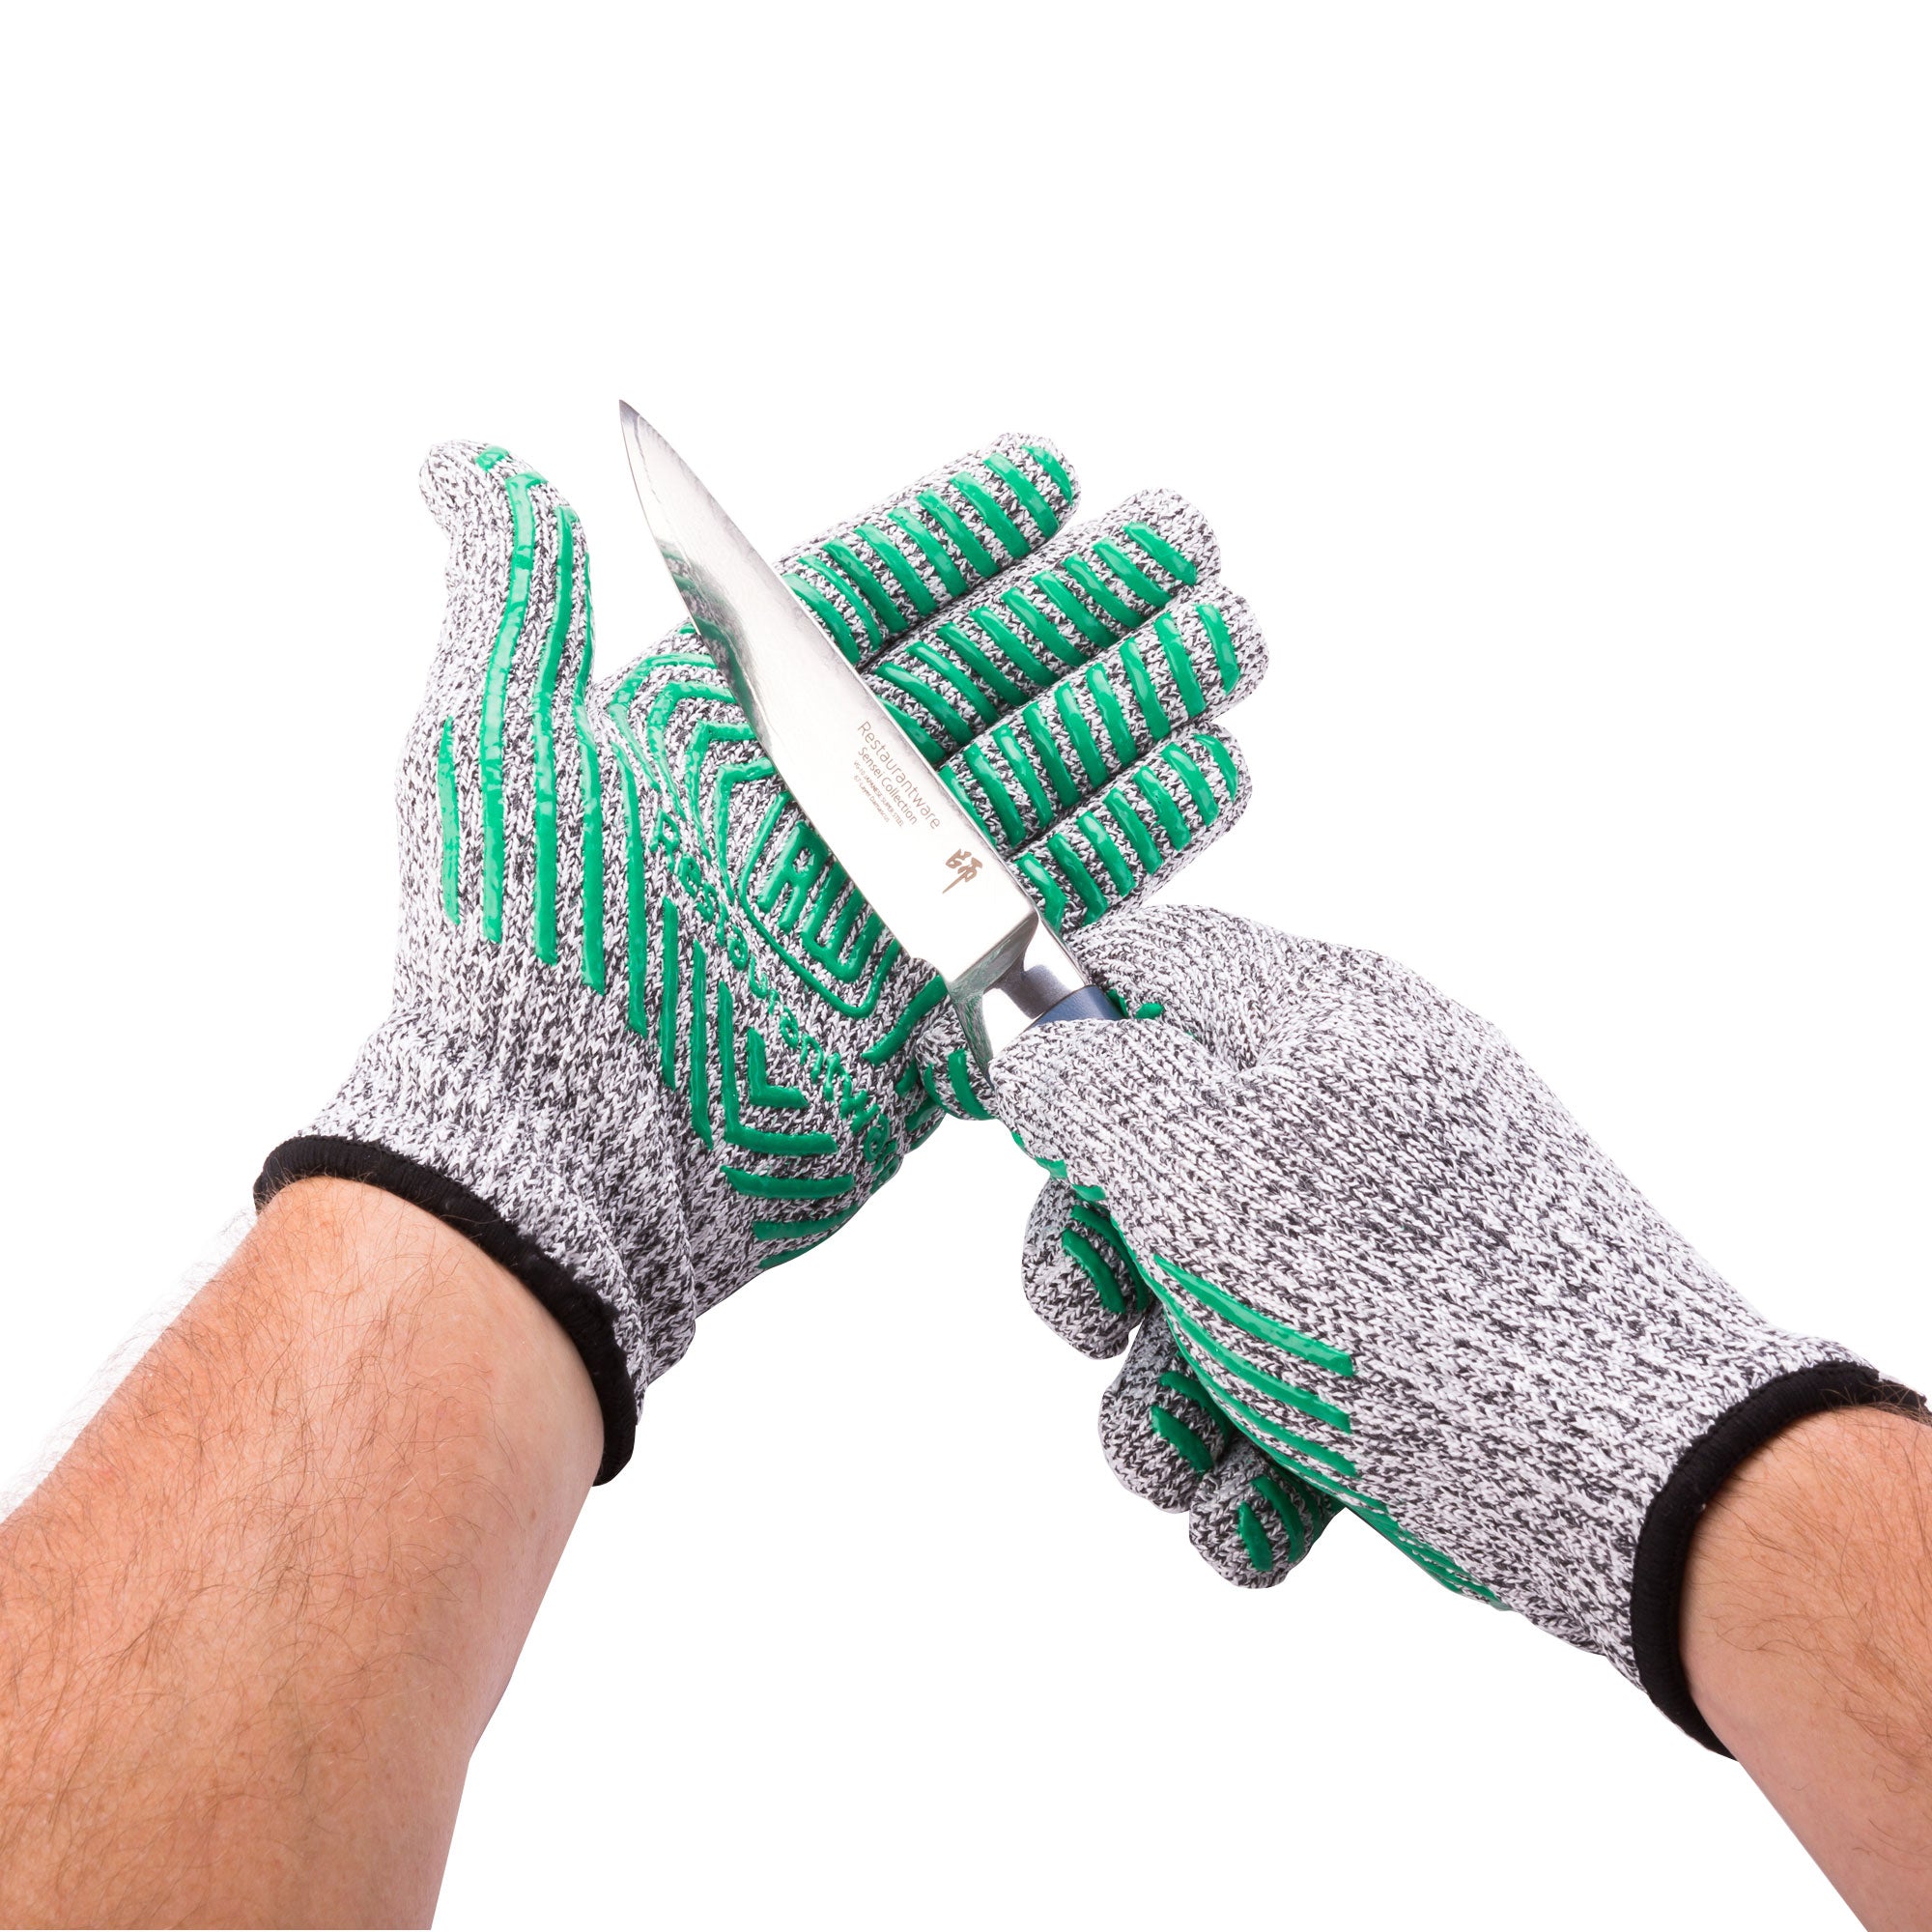 Naiyafly Cut Resistant Gloves Food Grade Level 5 Protection